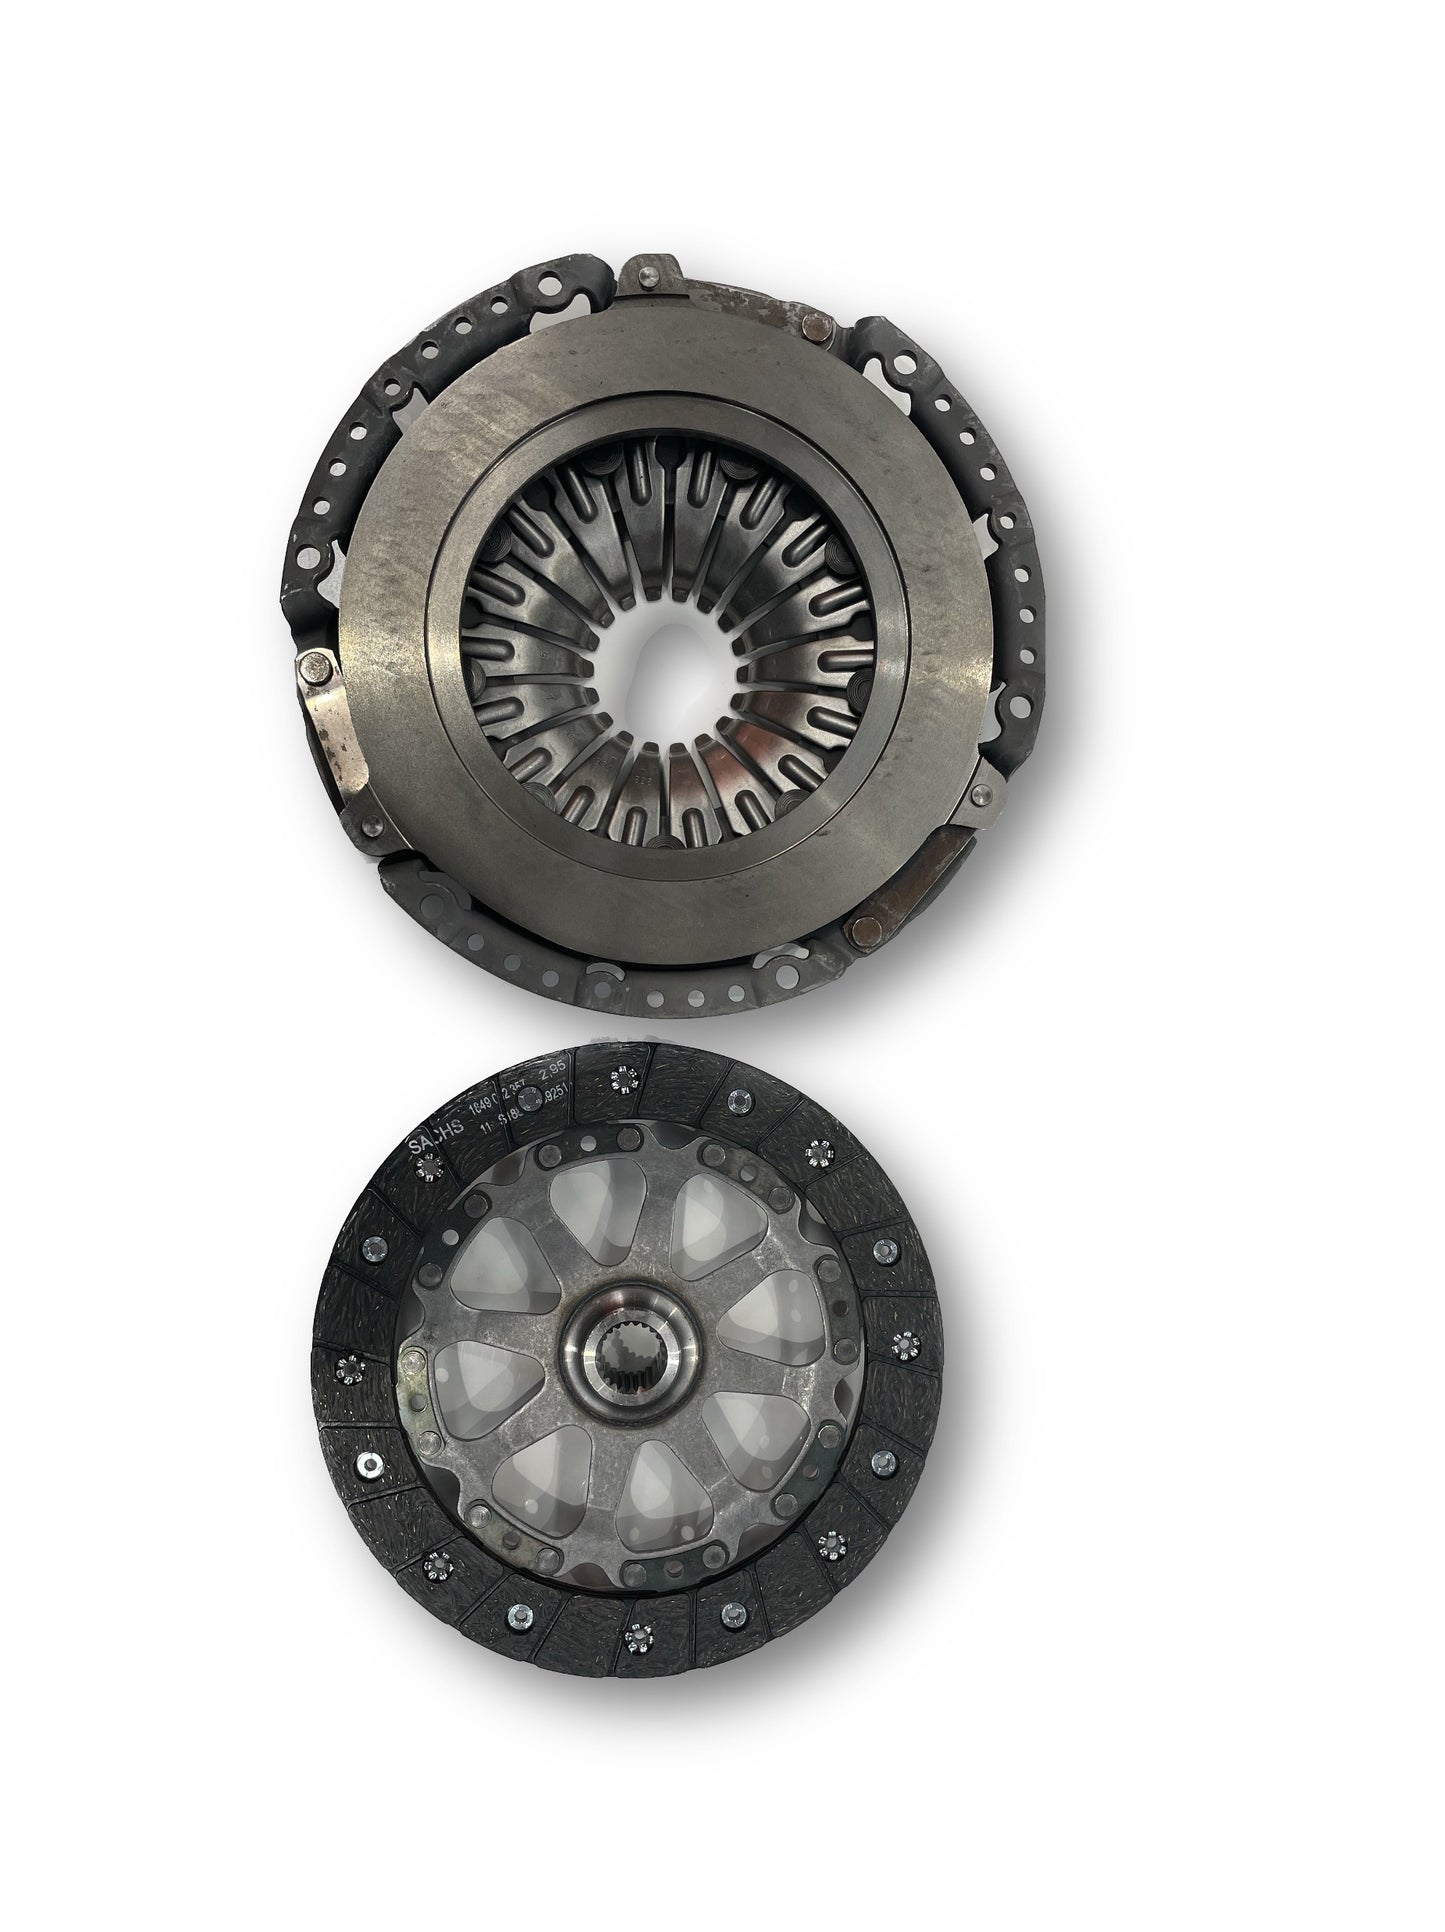 Clutch Kits for Boxster